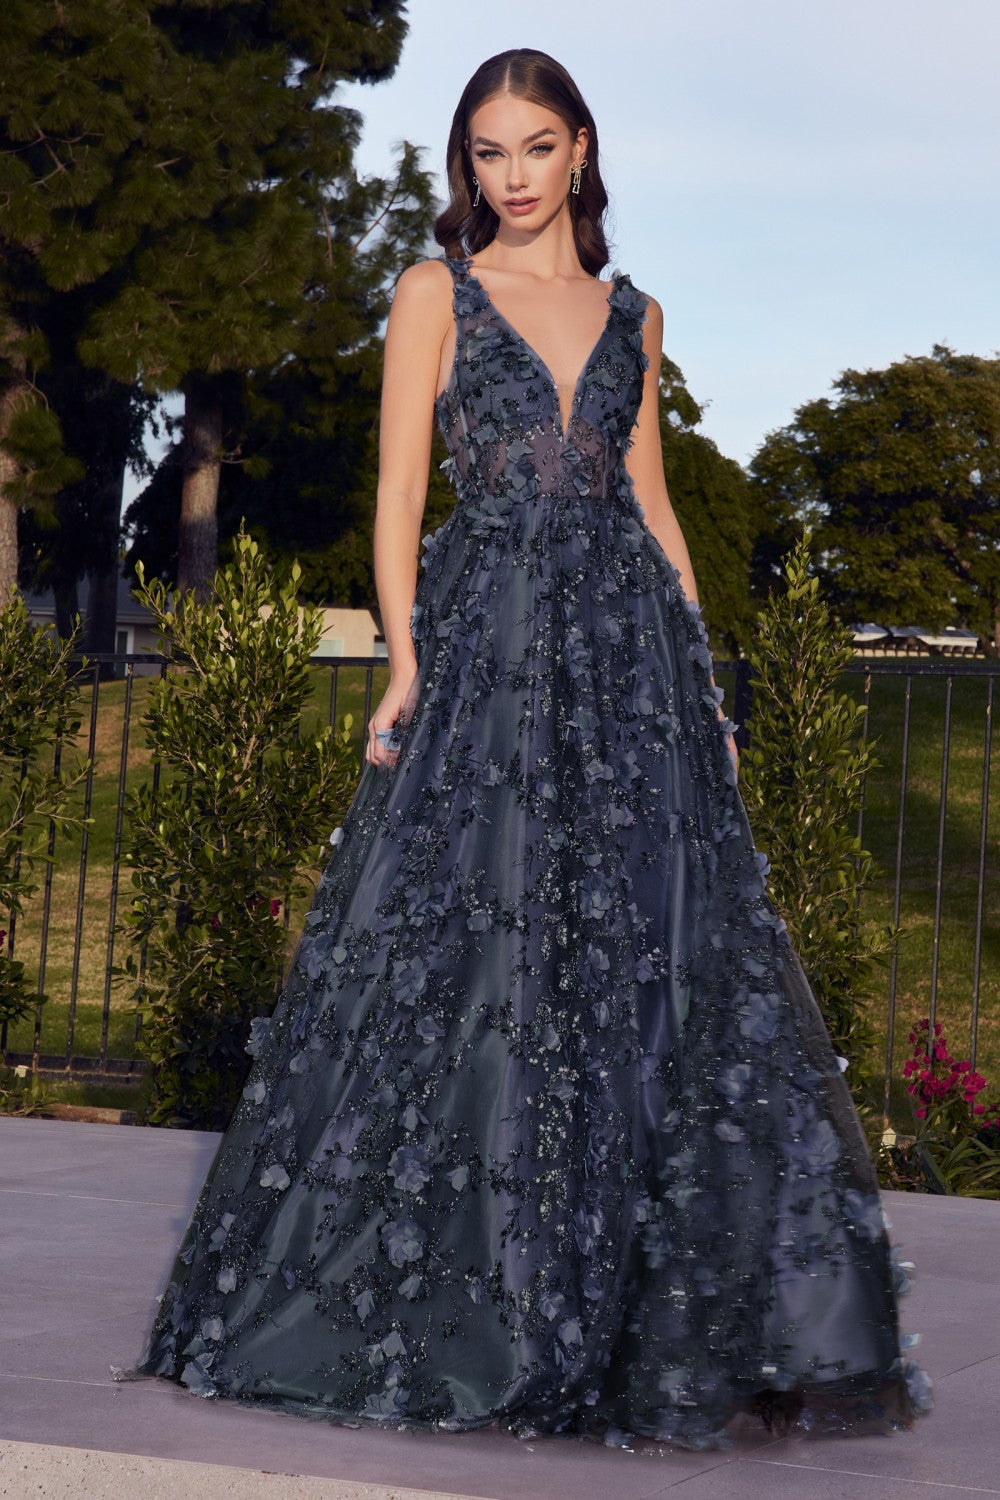 Navy Floral A-Line Ball Gown J838 - Women Evening Formal Gown - Special Occasion-Curves